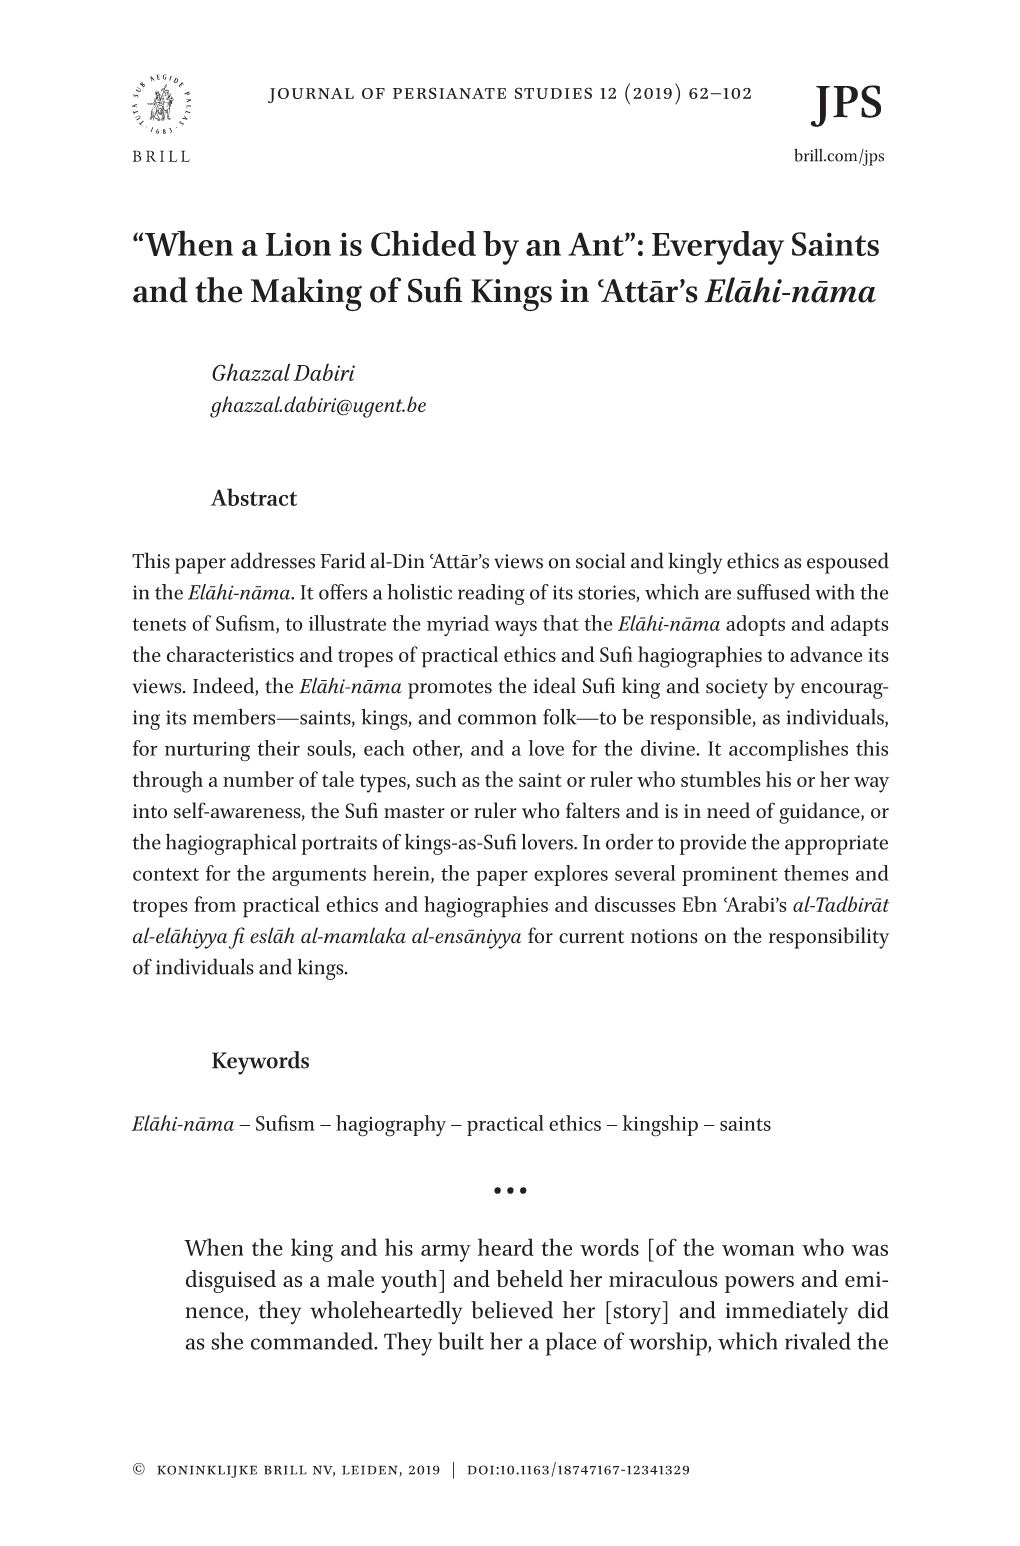 “When a Lion Is Chided by an Ant”: Everyday Saints and the Making of Sufi Kings in ʿattār’S Elāhi-Nāma